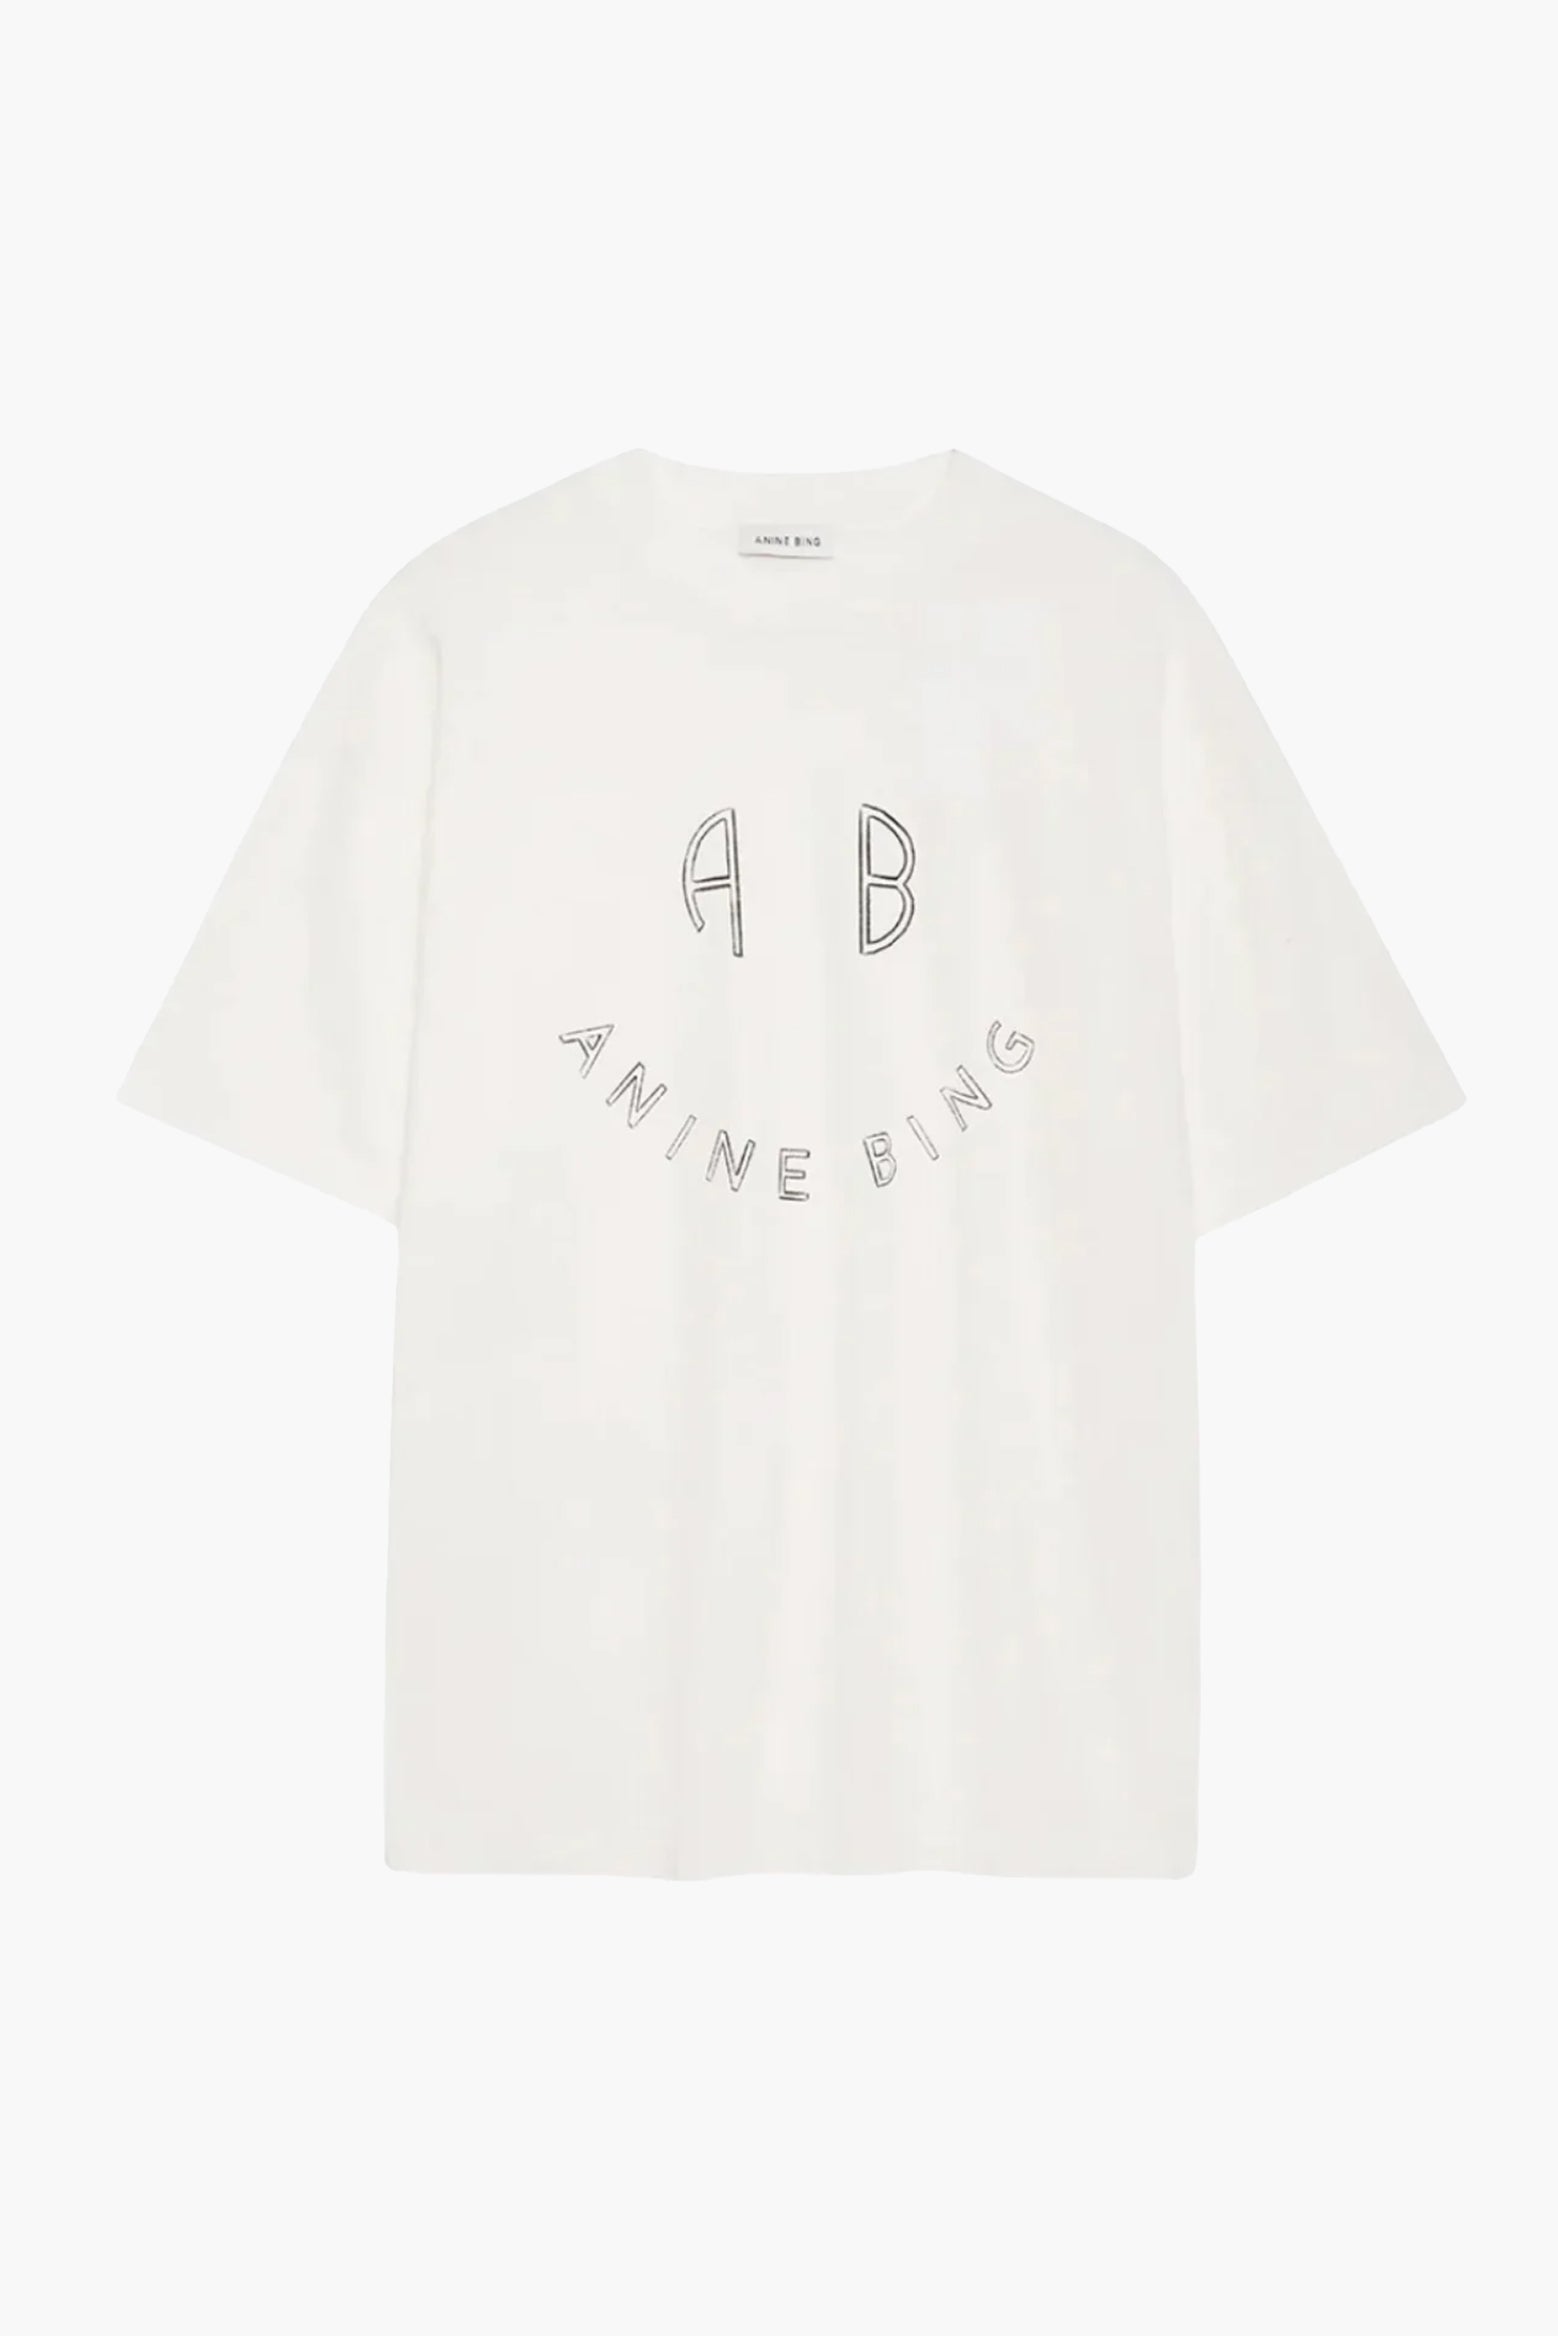 ANINE BING Kent Tee Smiley in Ivory | The New Trend Australia